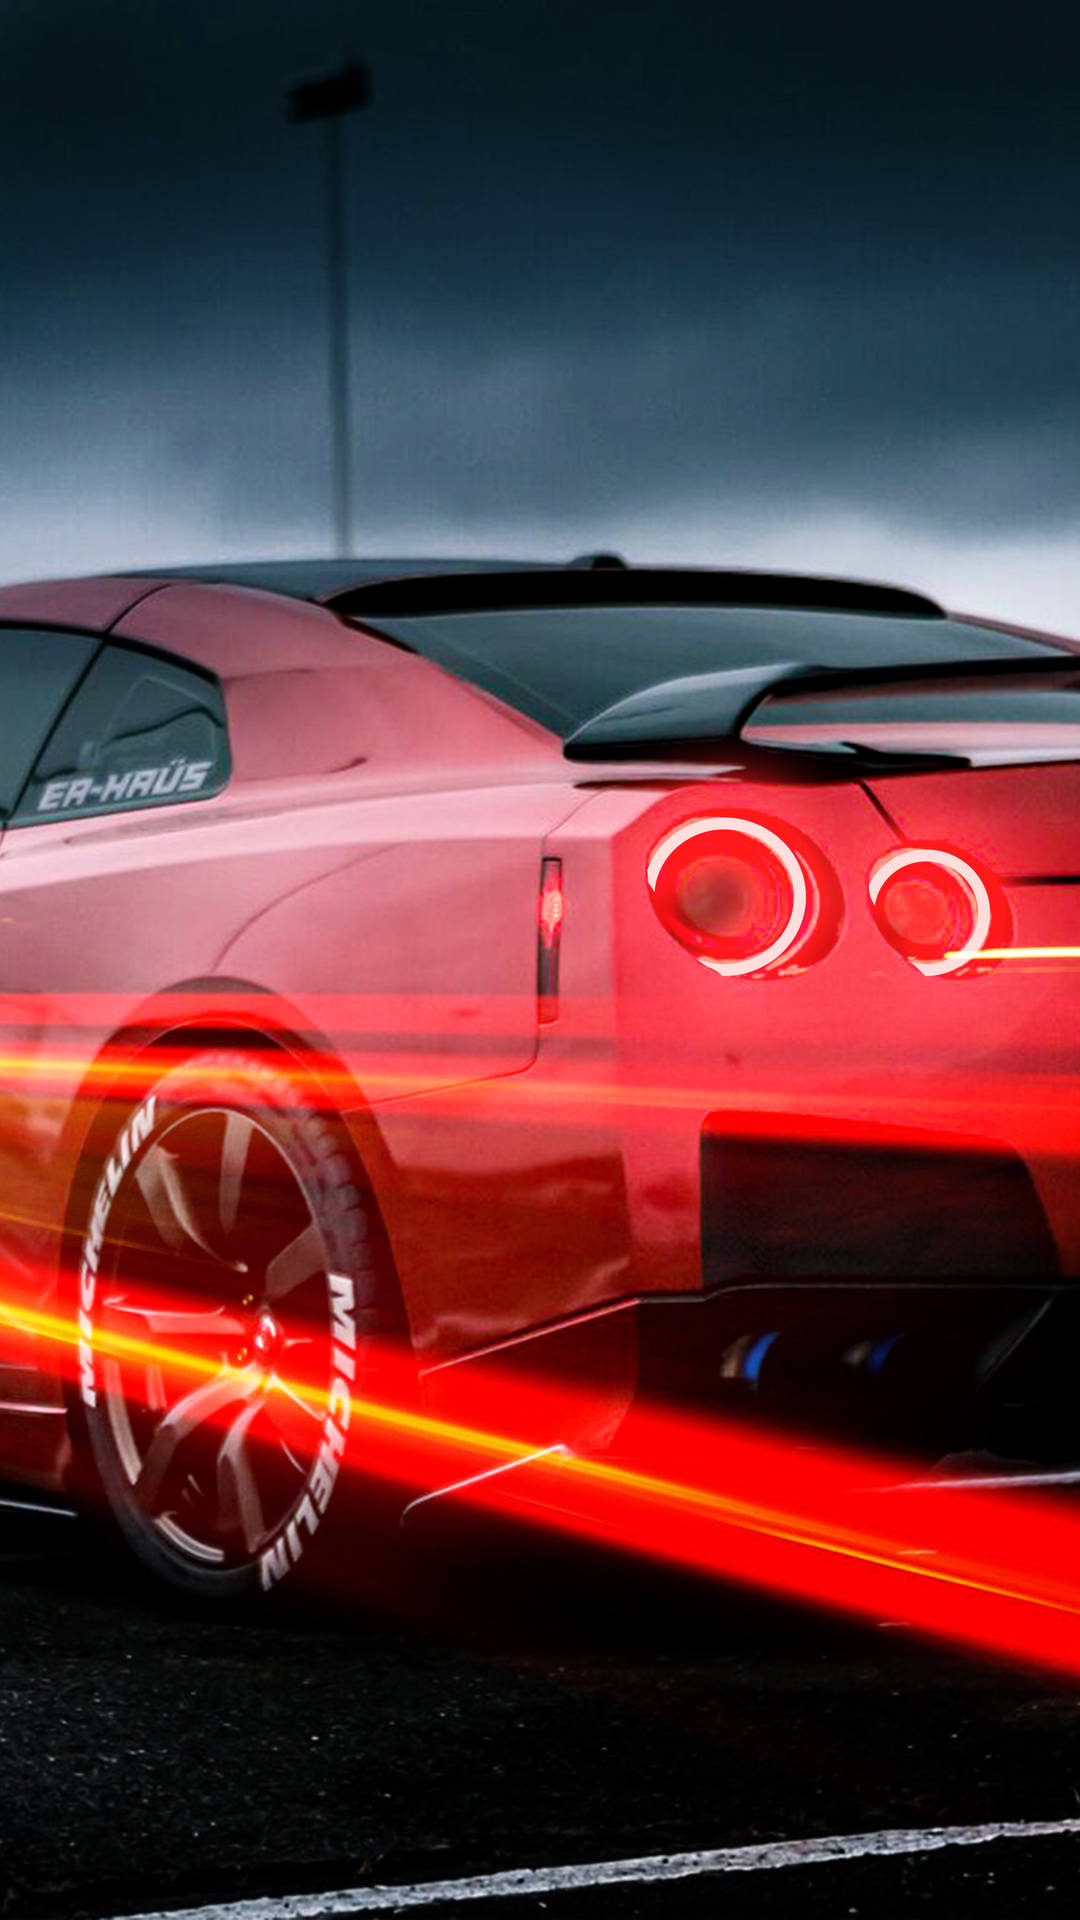 Download Red Trail Lights On Red 4k Car Iphone Wallpaper 